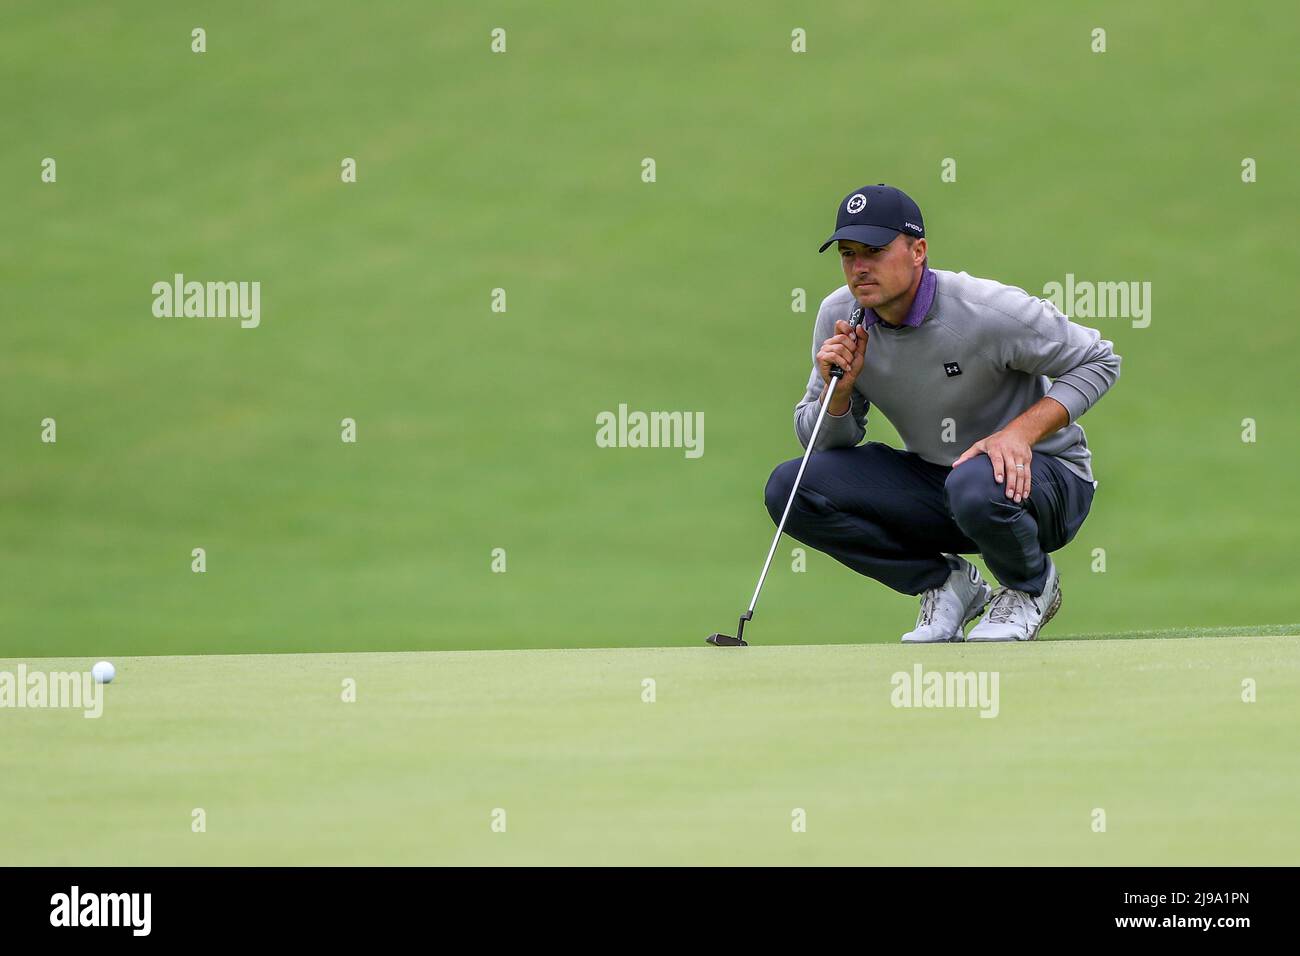 Tulsa, OK, USA. 21st May, 2022. Jordan Spieth sizes up his putt on the 12th hole during the third round of the 2022 PGA Championship at Southern Hills Country Club in Tulsa, OK. Gray Siegel/Cal Sport Media/Alamy Live News Stock Photo